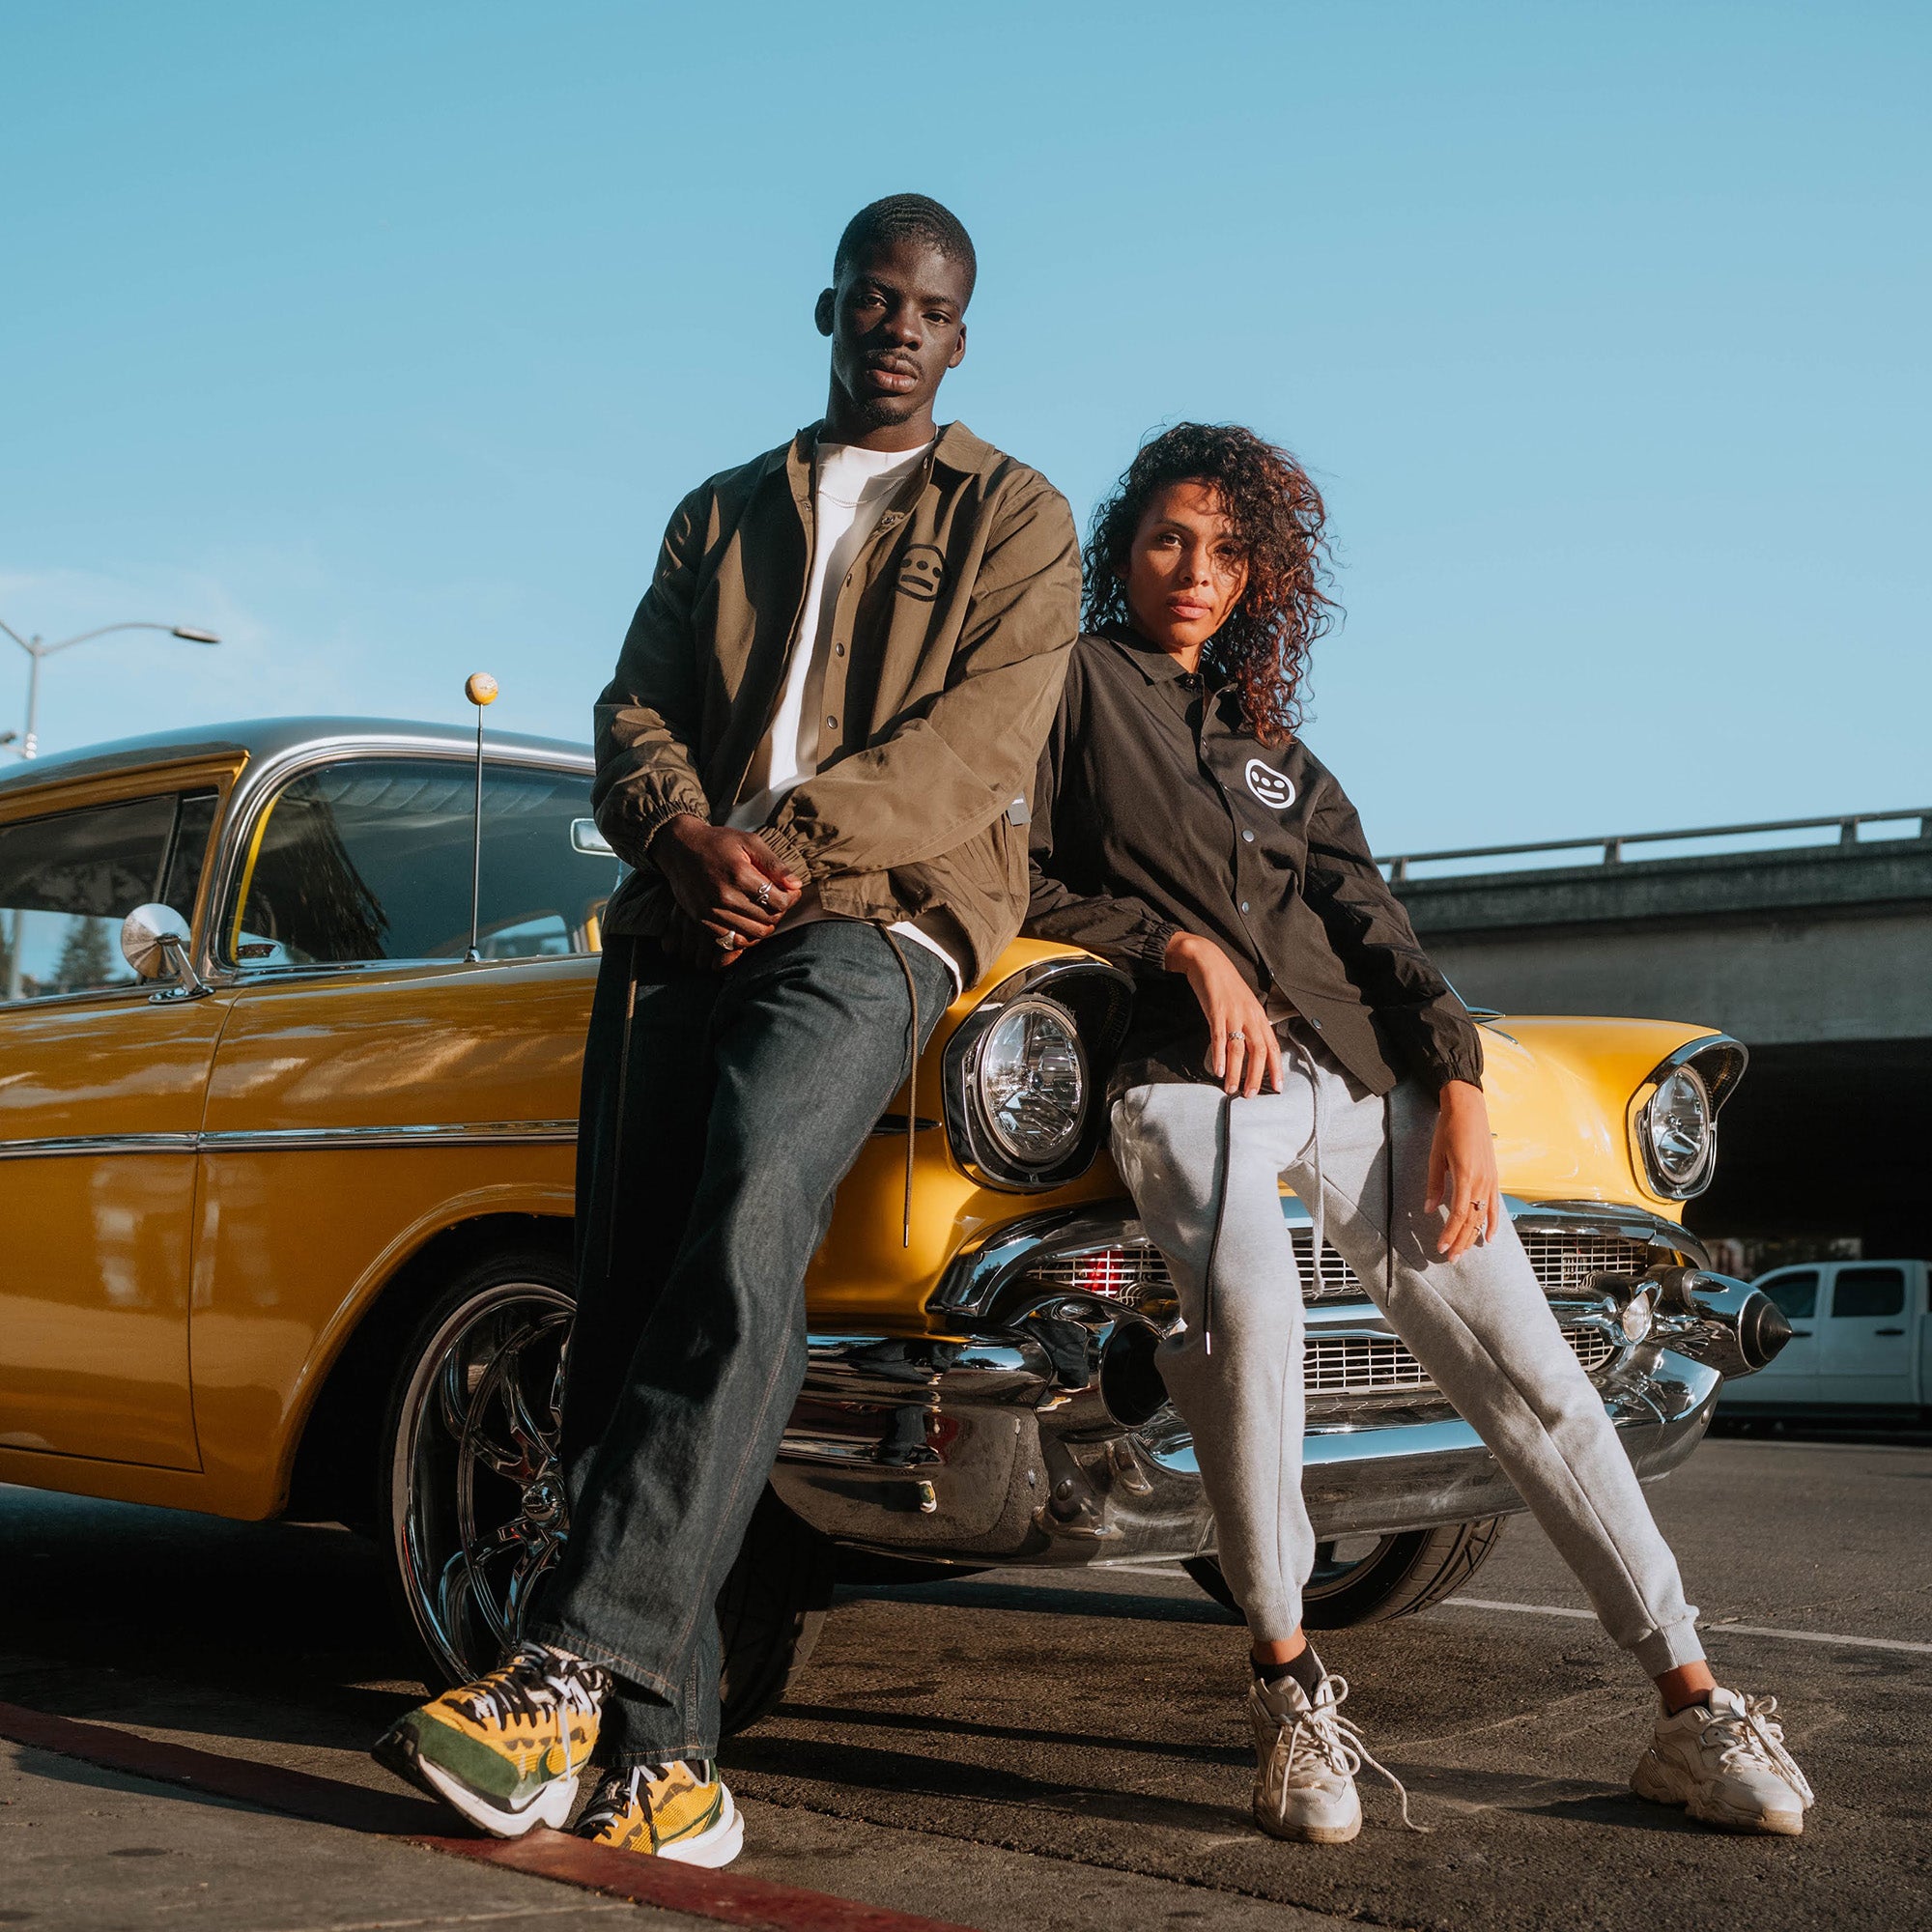 A man and woman leaning against a car, the male wearing an olive jacket with a black Hiero logo and the female wearing a black jacket with a white Hiero logo.